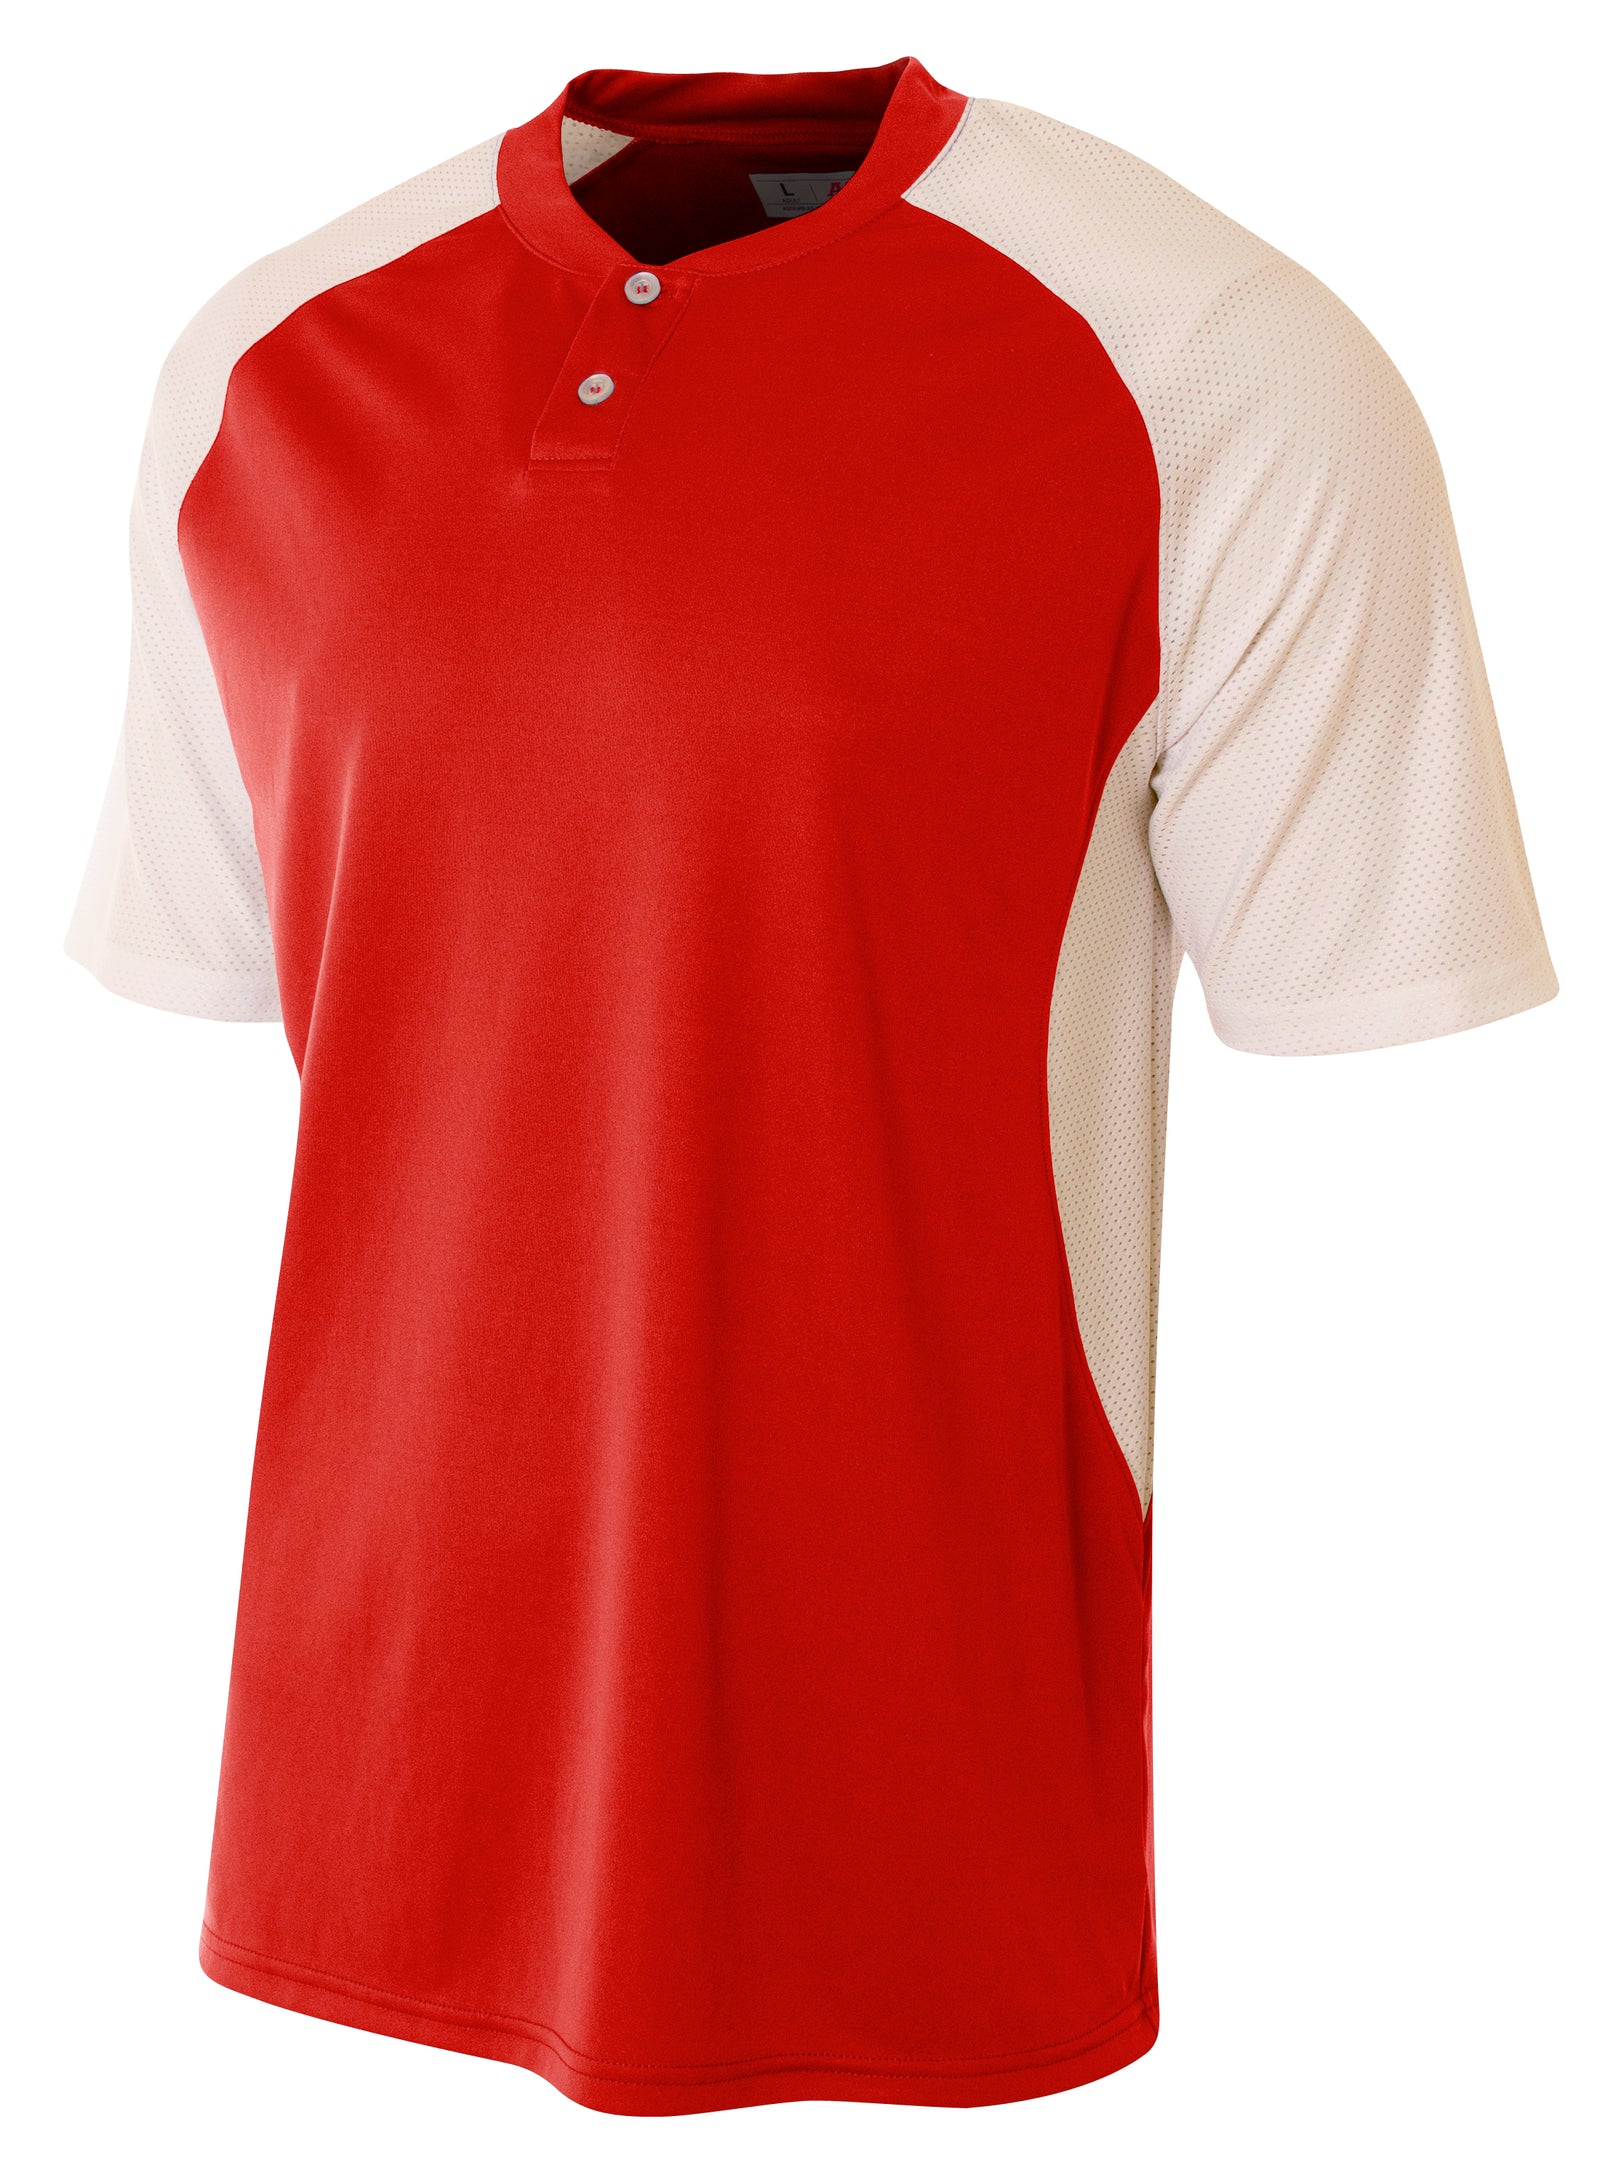 Scarlet/white A4 Contrast Henley